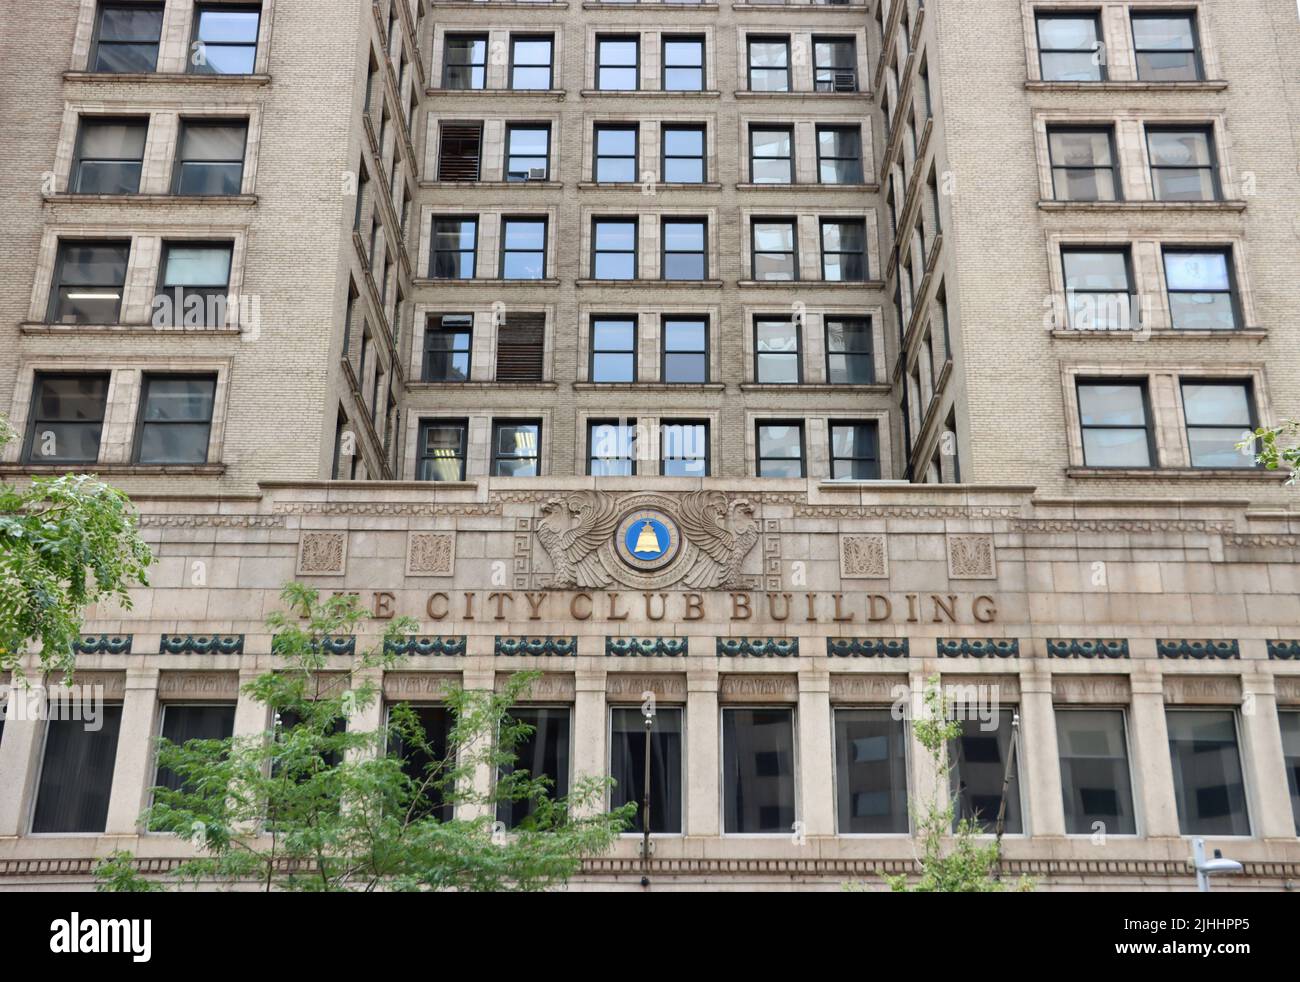 The City Club Building on Euclid avenue in Cleveland, June 2022 Stock Photo